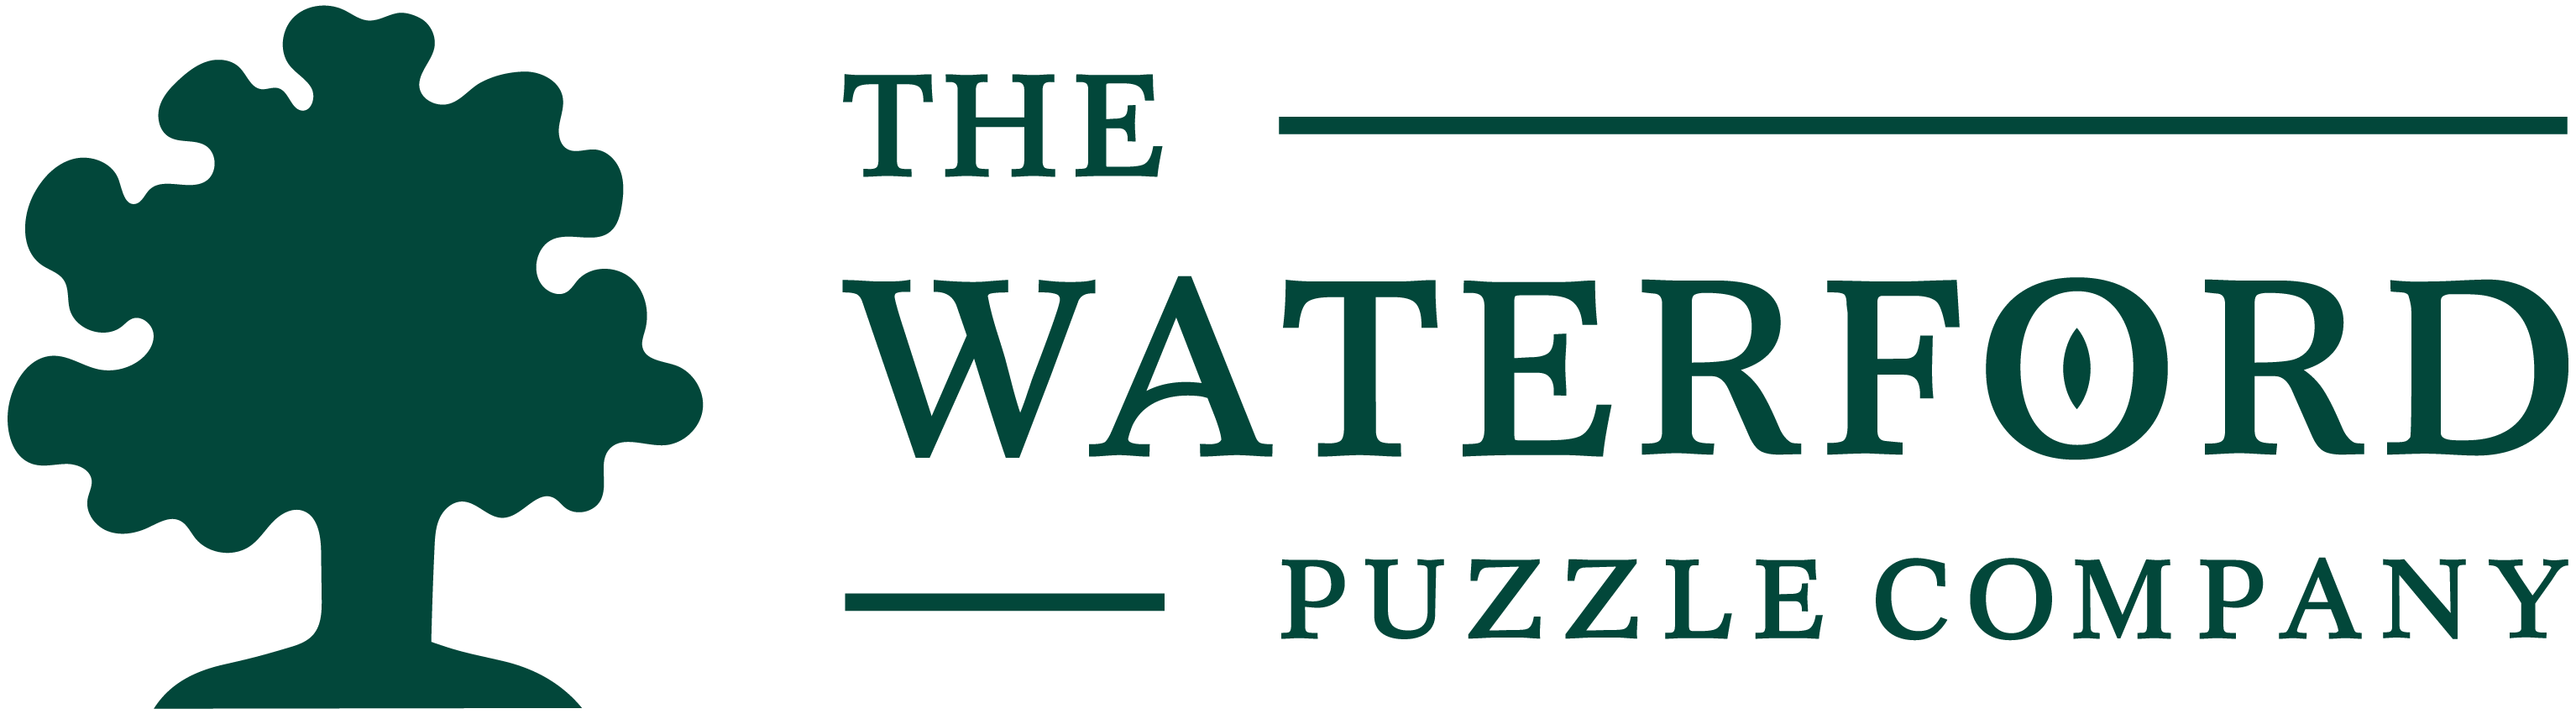 Waterford Puzzle